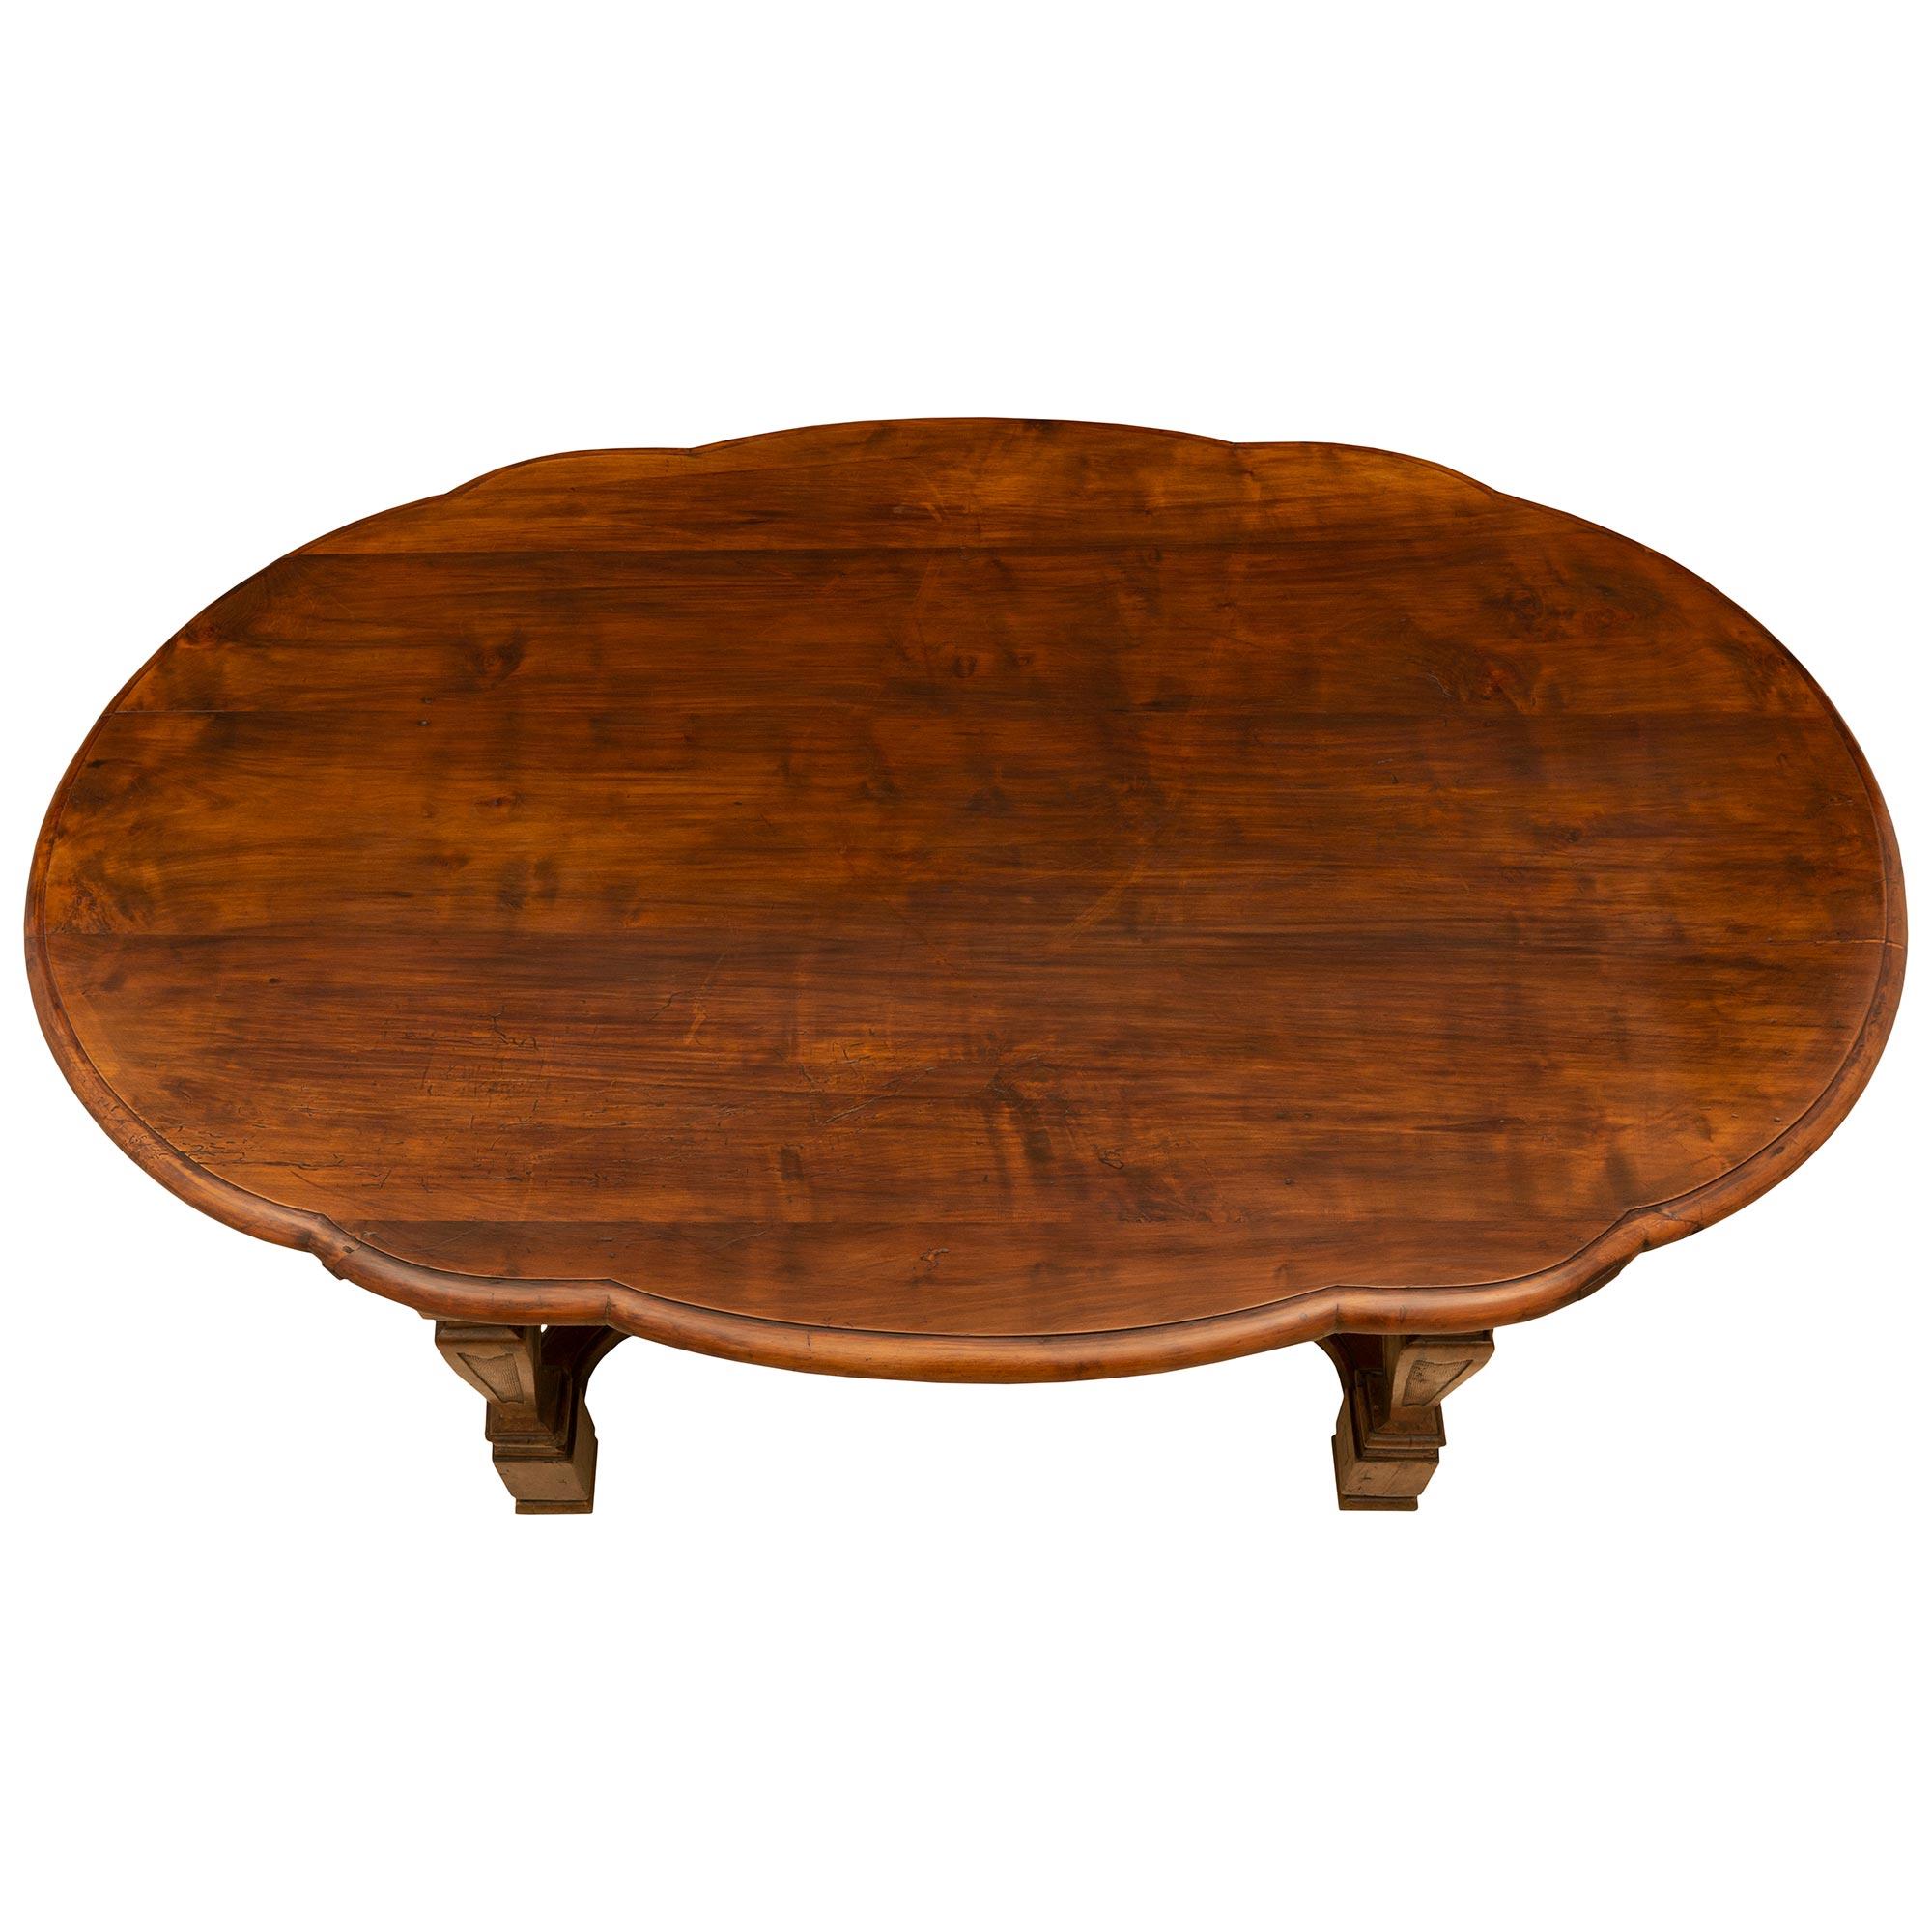 A sensational and unusual mid 18th century country Italian walnut oval center/dining table. The table is raised by four baluster shaped carved legs joined by an X curved moulded stretcher with a central oval. At each side is a serpentine shaped